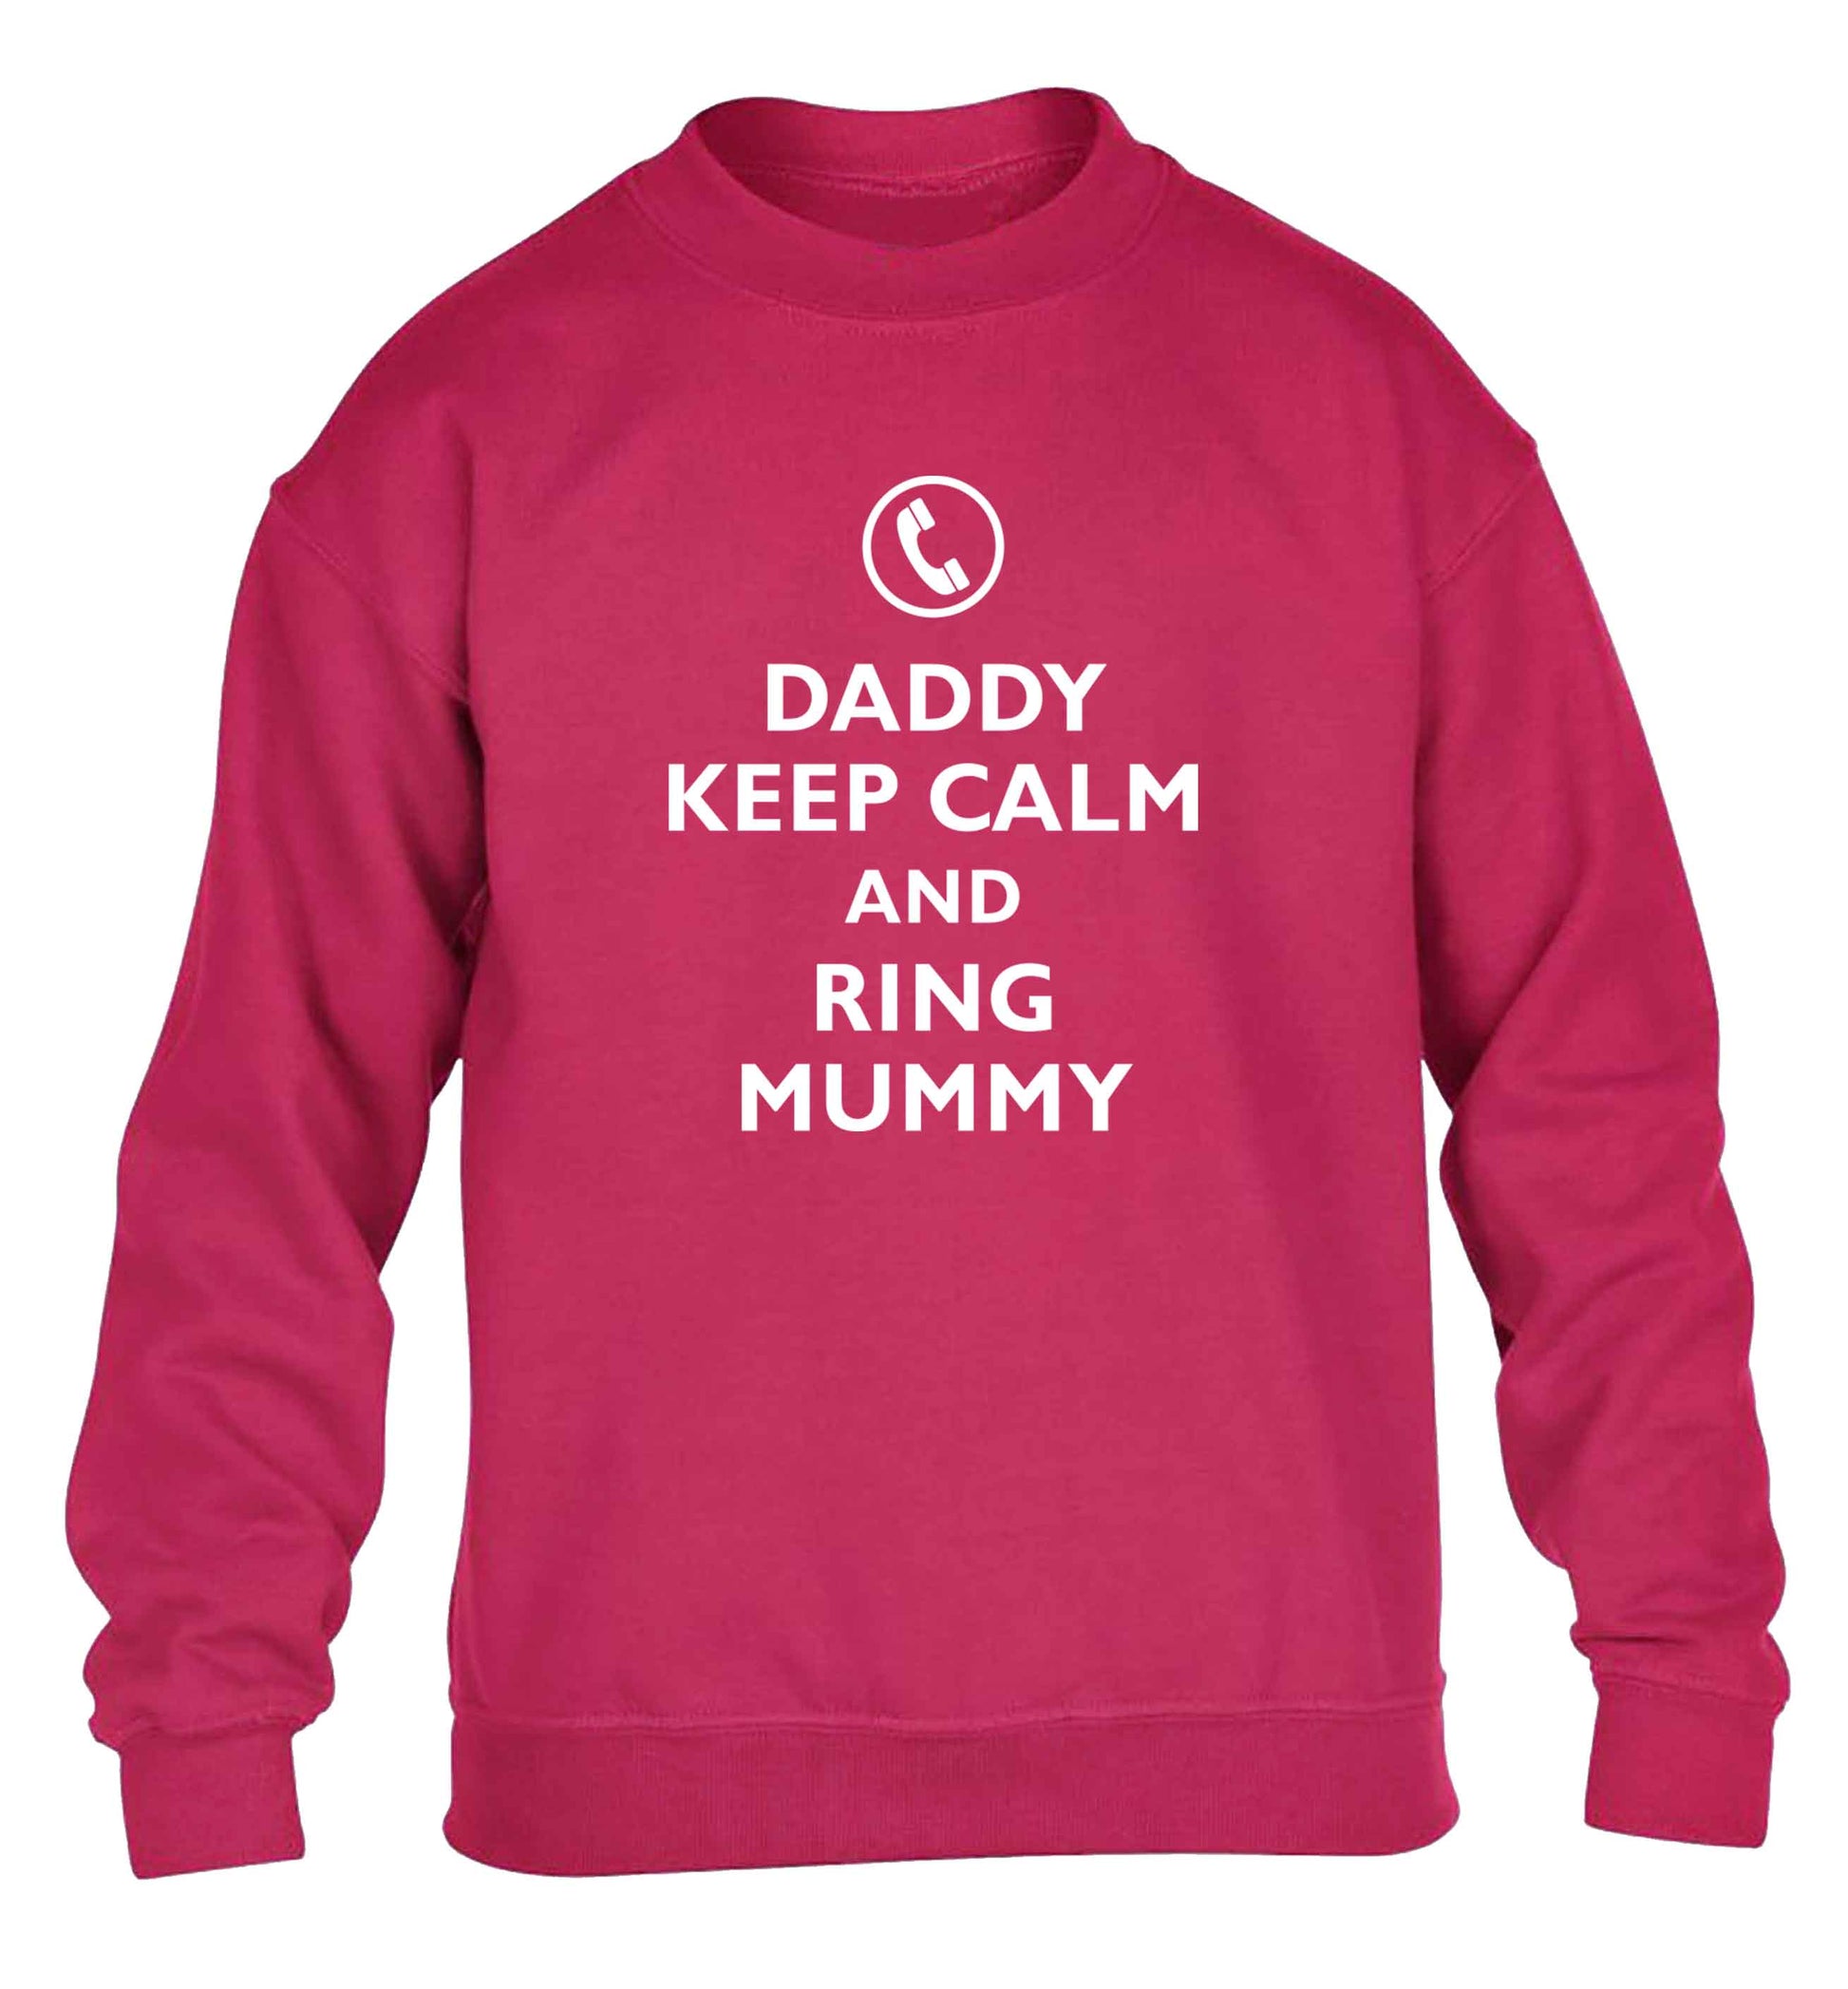 Daddy keep calm and ring mummy children's pink sweater 12-13 Years